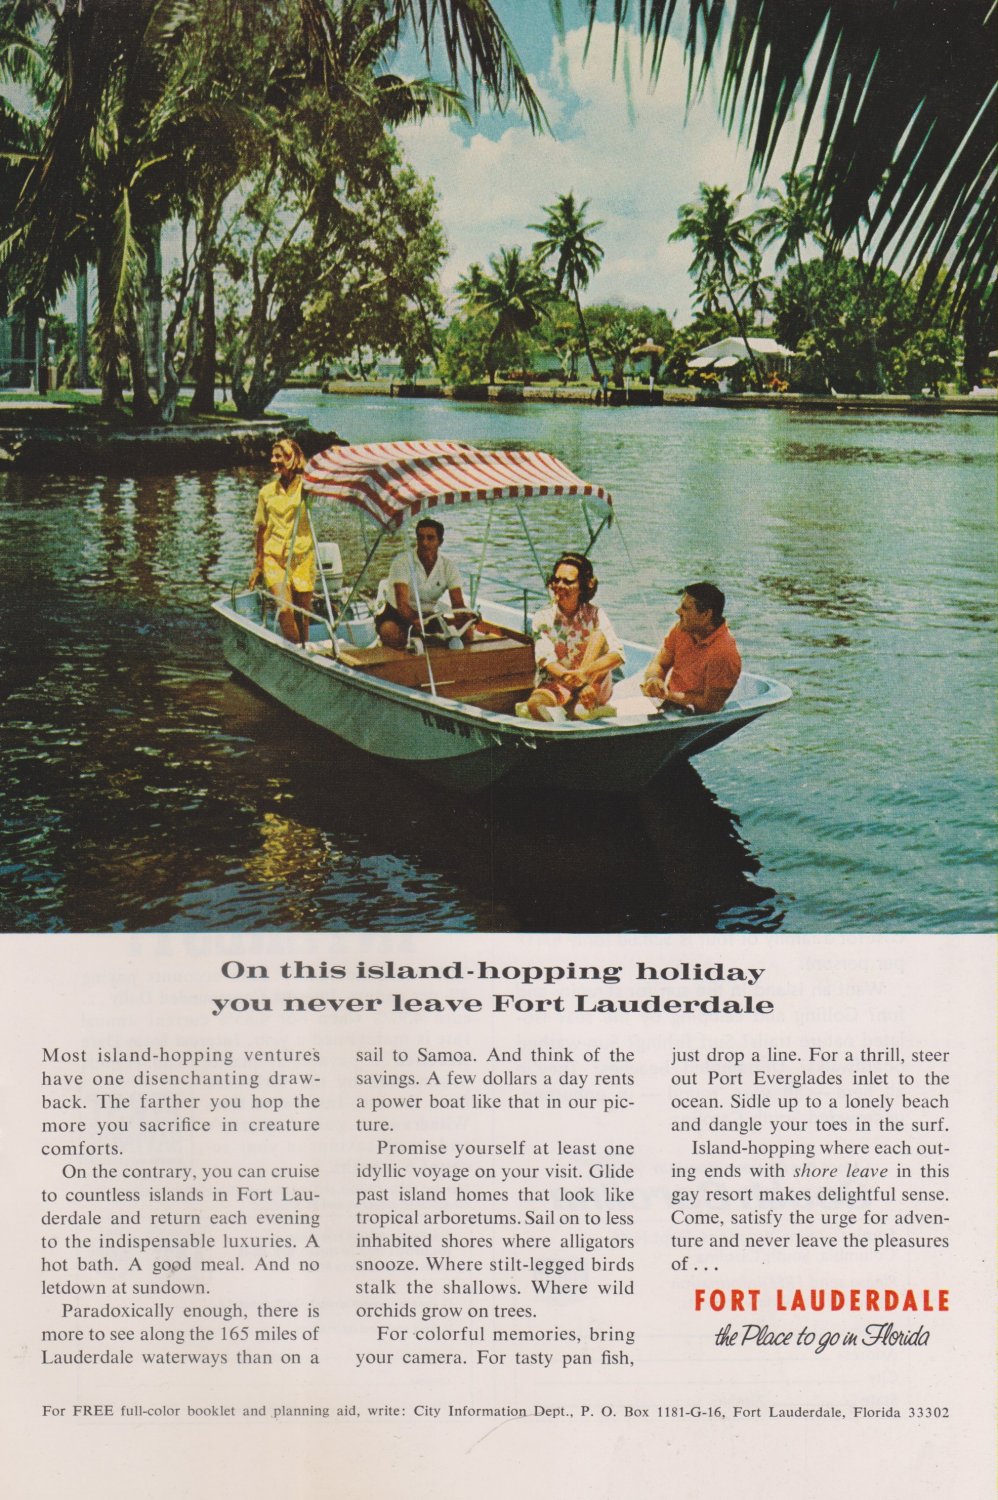 1967 vintage Travel AD for FORT LAUDERDALE FLORIDA VACATIONS